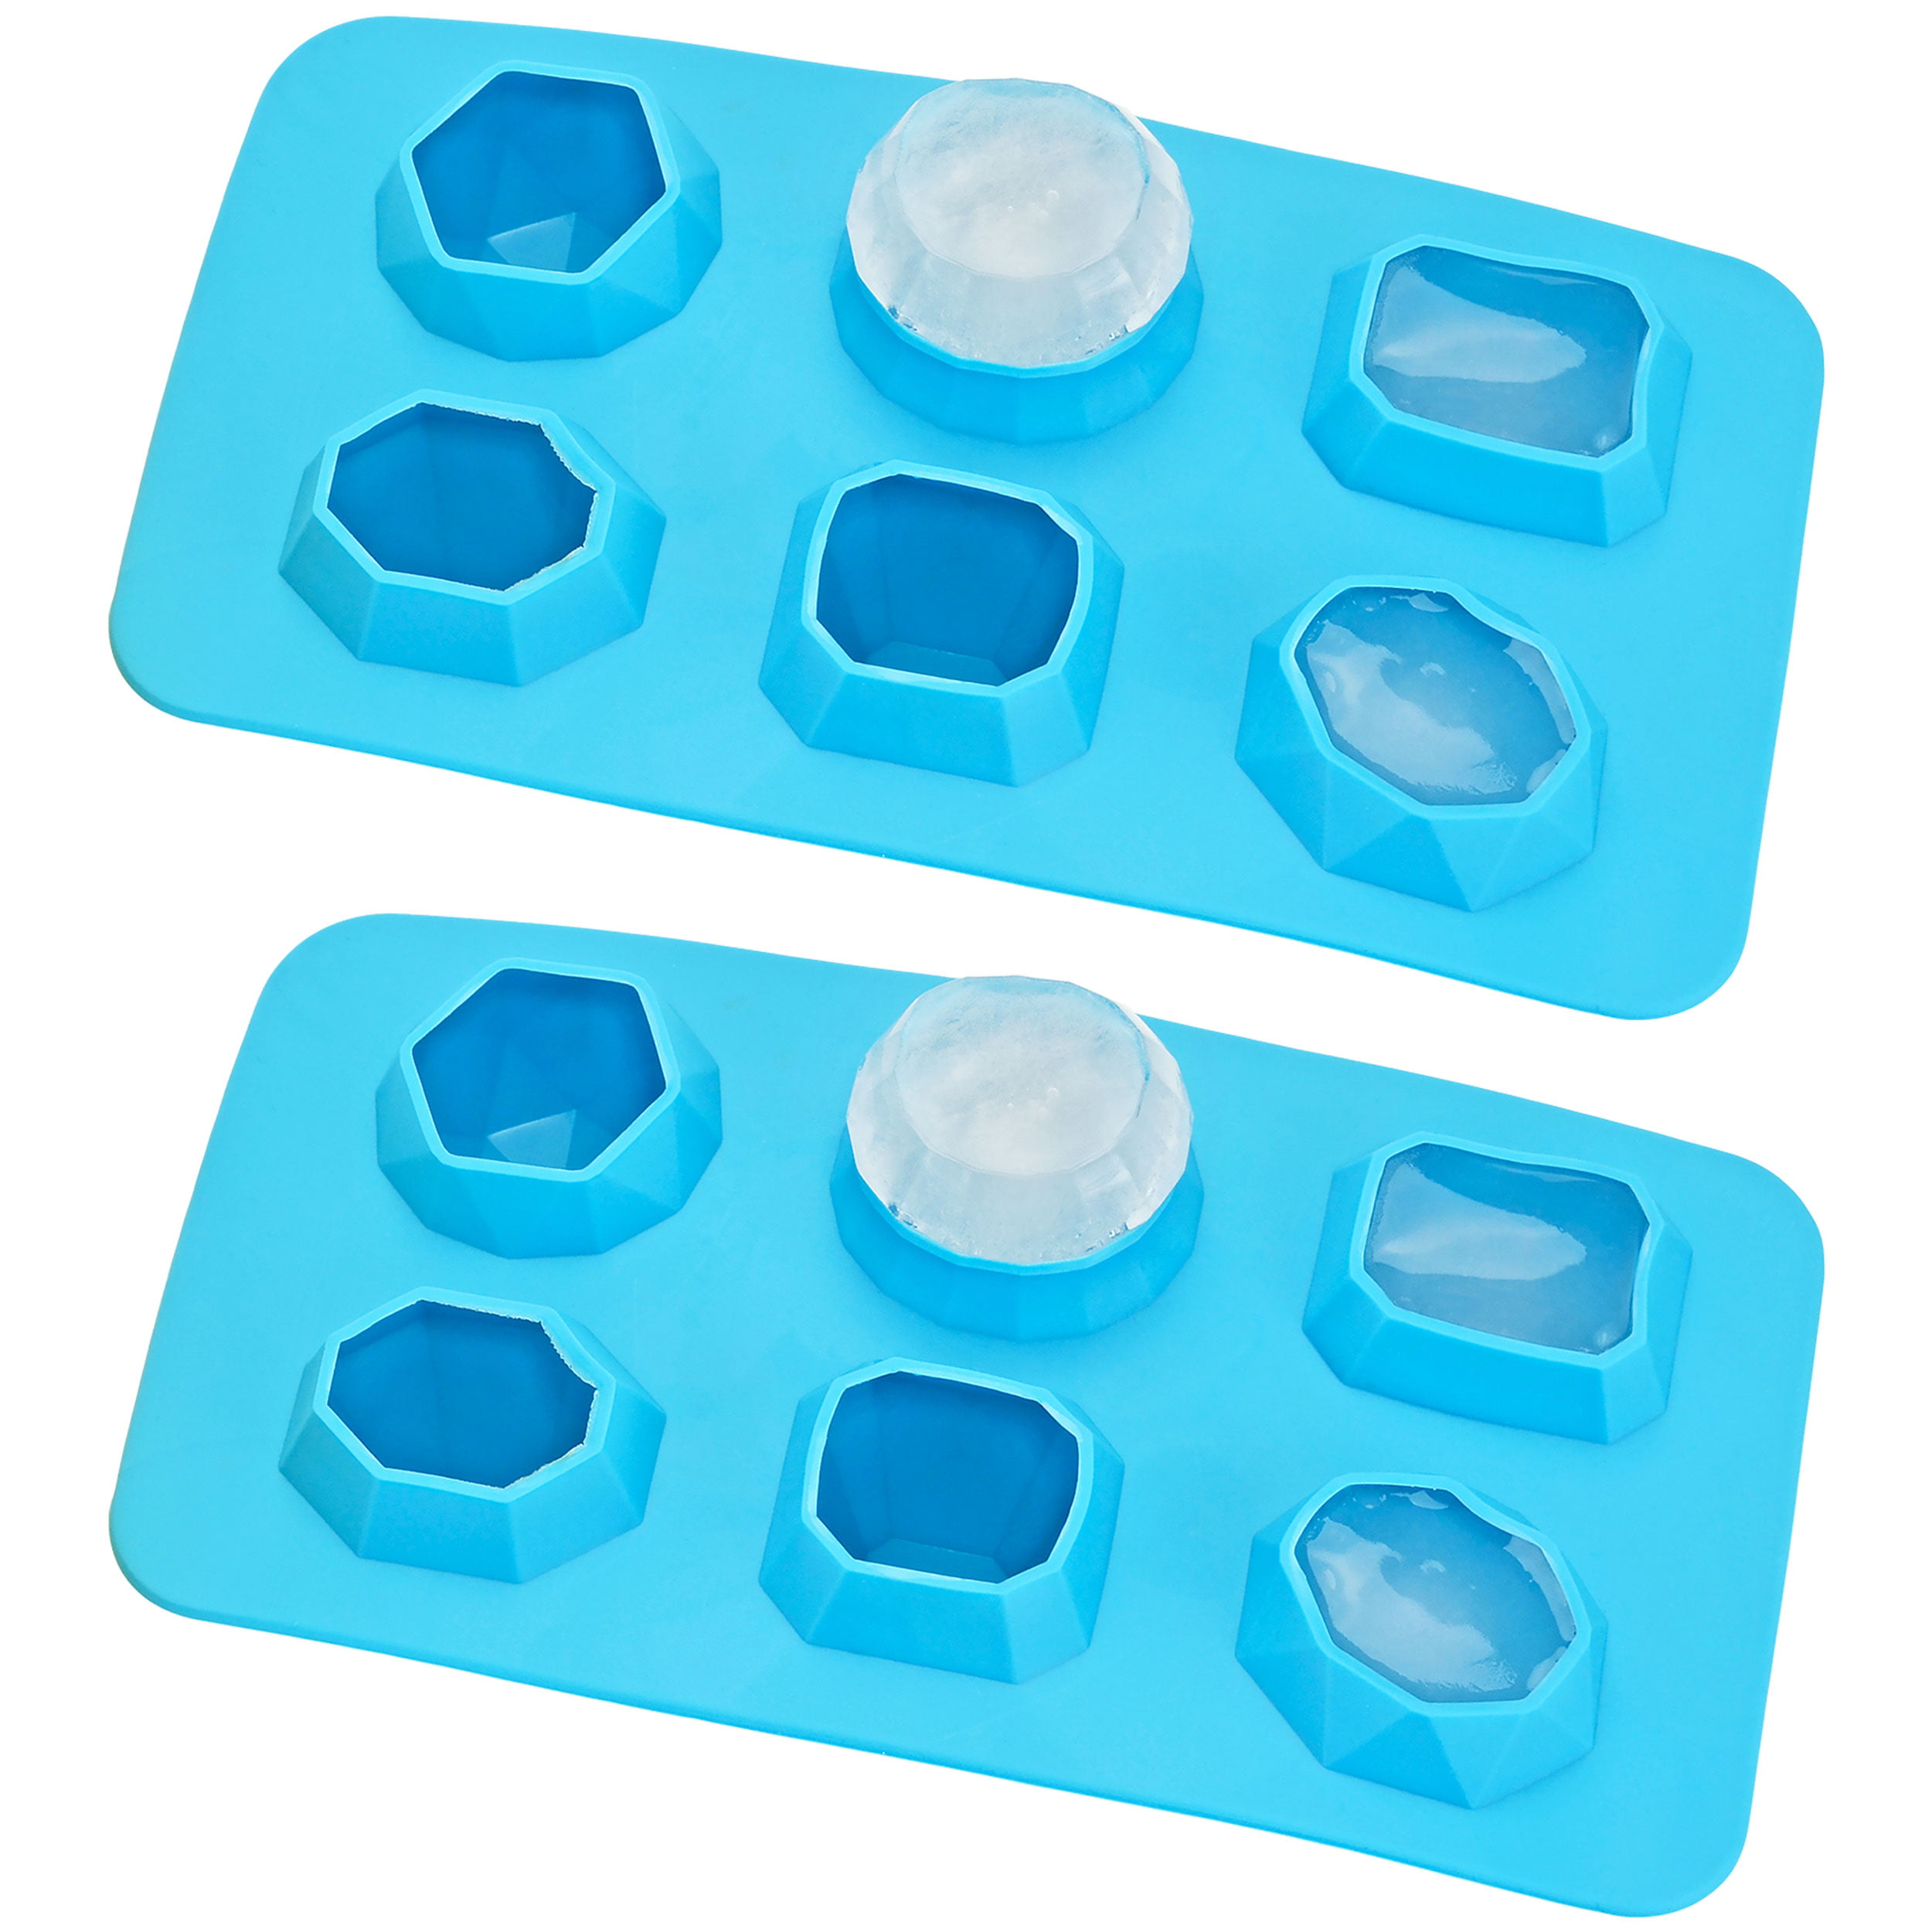 3D Penguin Gifts Ice Cube Tray Fun Shapes, Odd Novelty Cute Gifts for  Penguins L